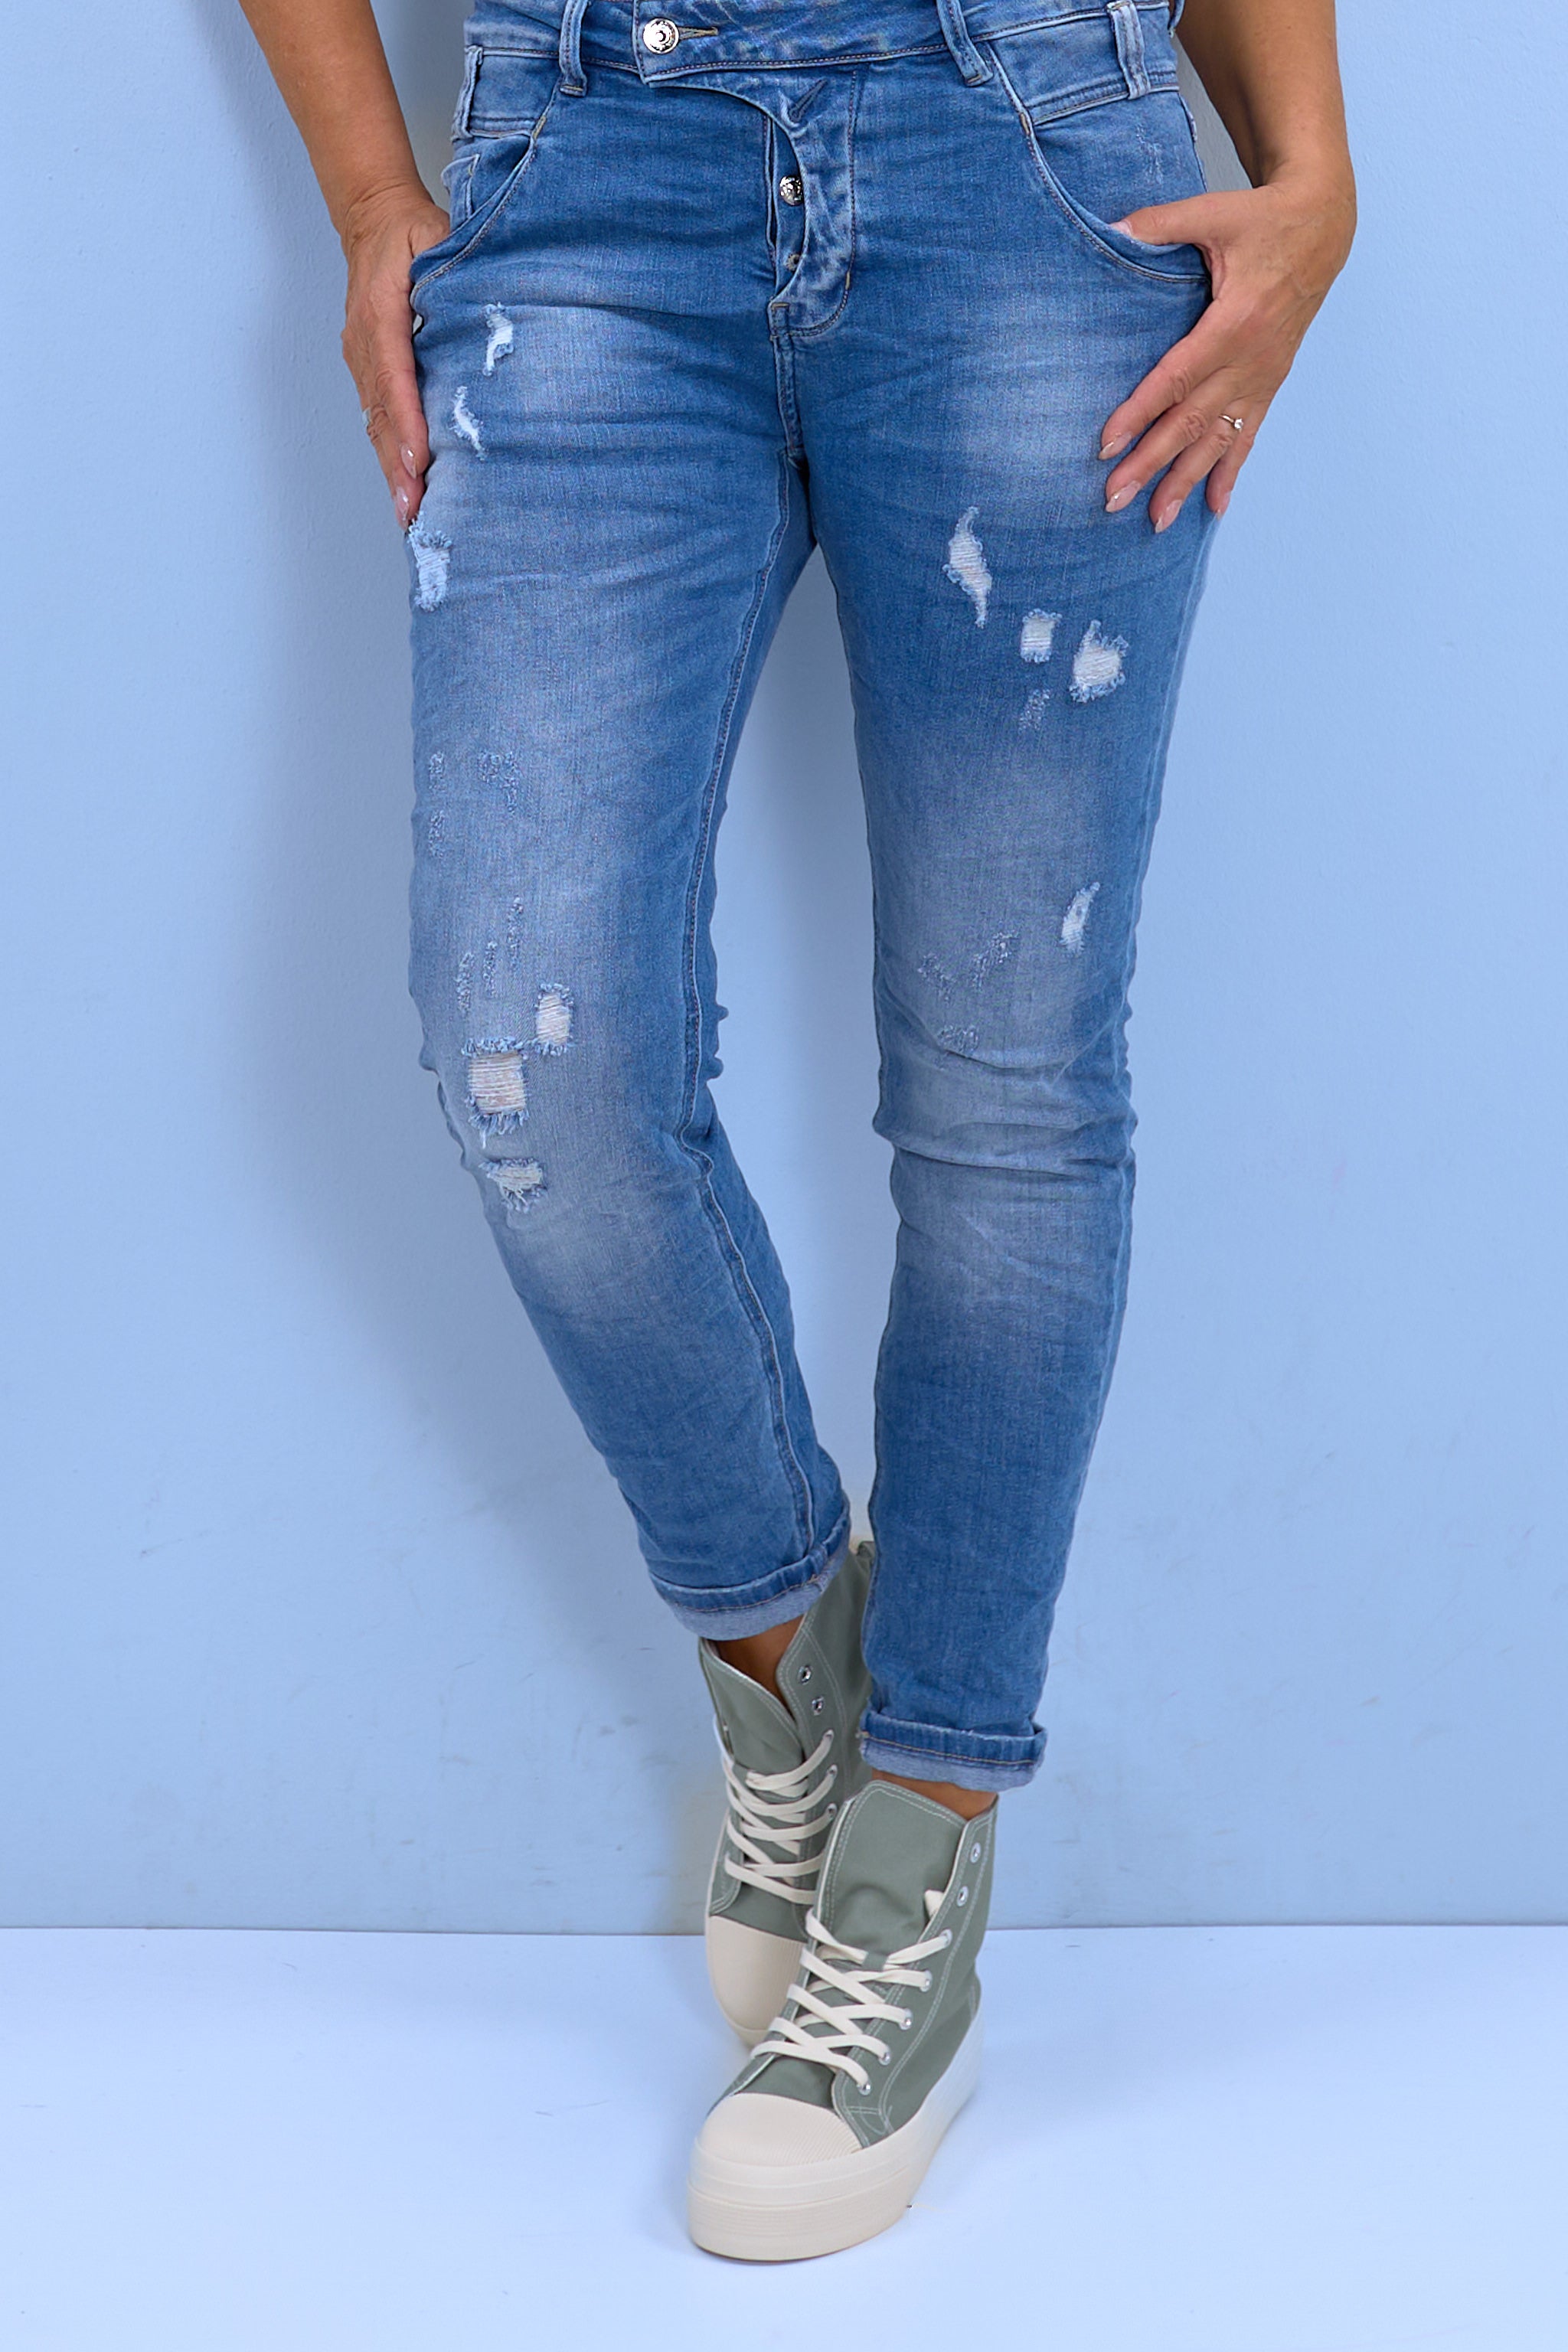 Jeans with a crinkled look, denim blue